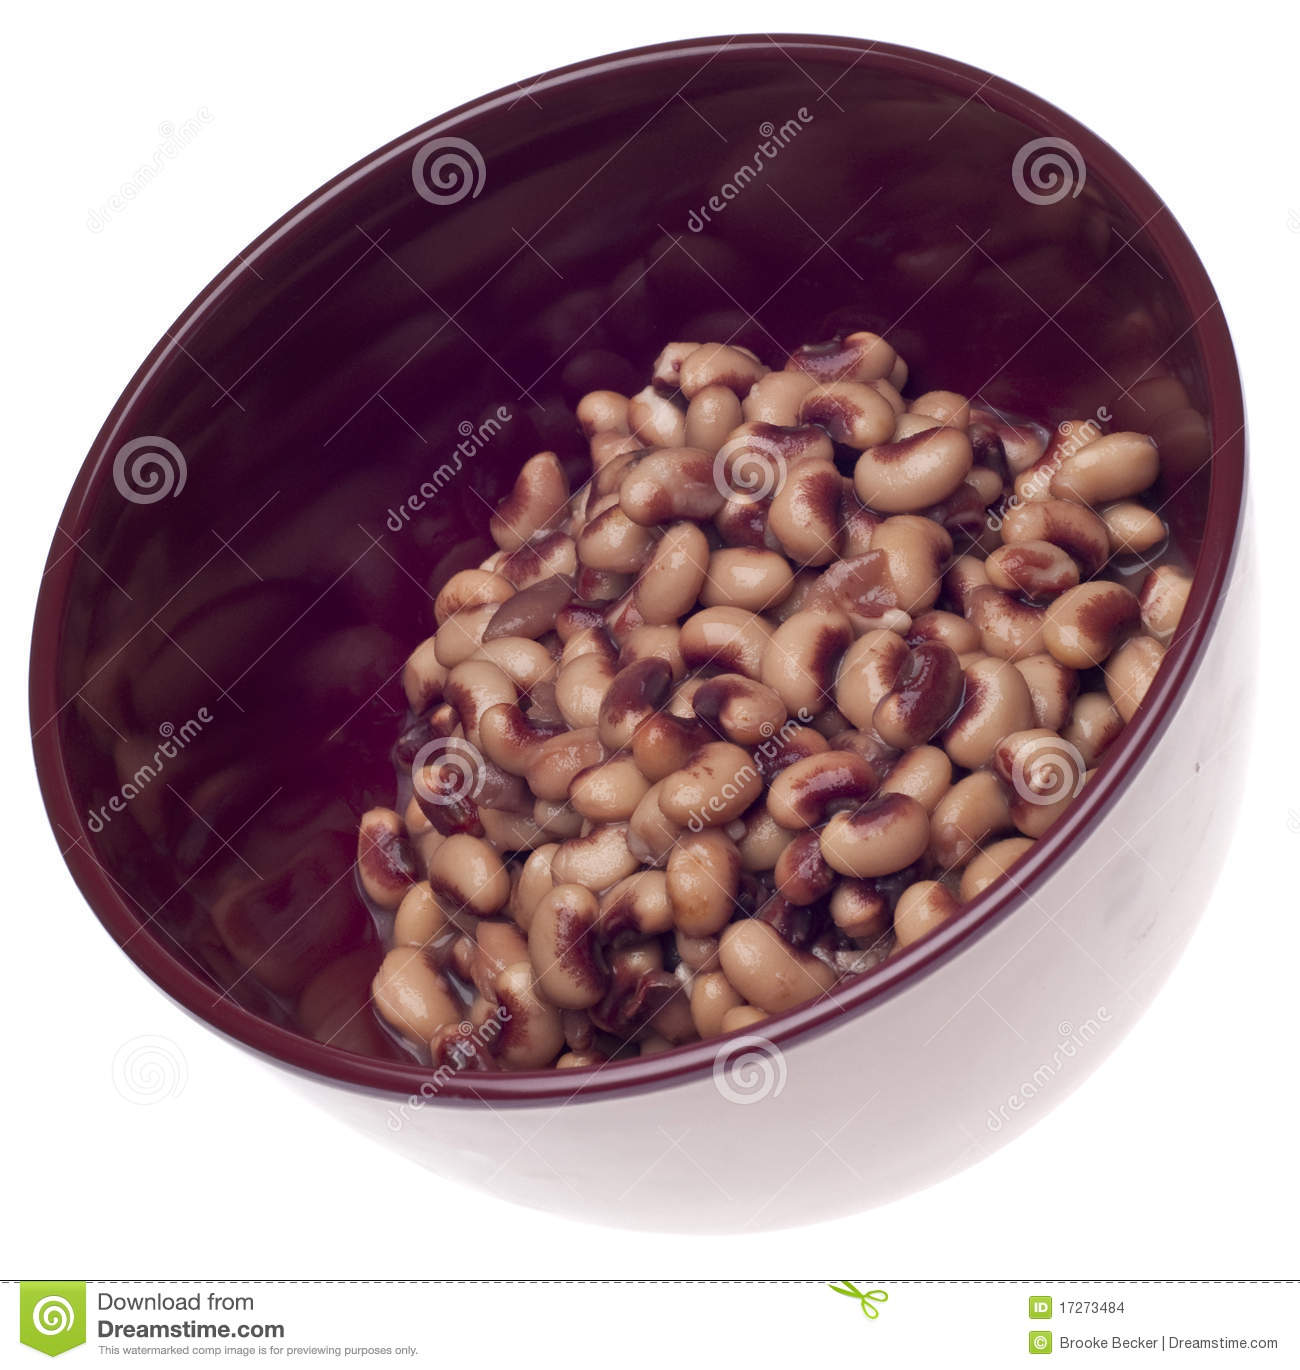 Bowl Of Canned Black Eyed Peas Isolated On White With A Clipping Path